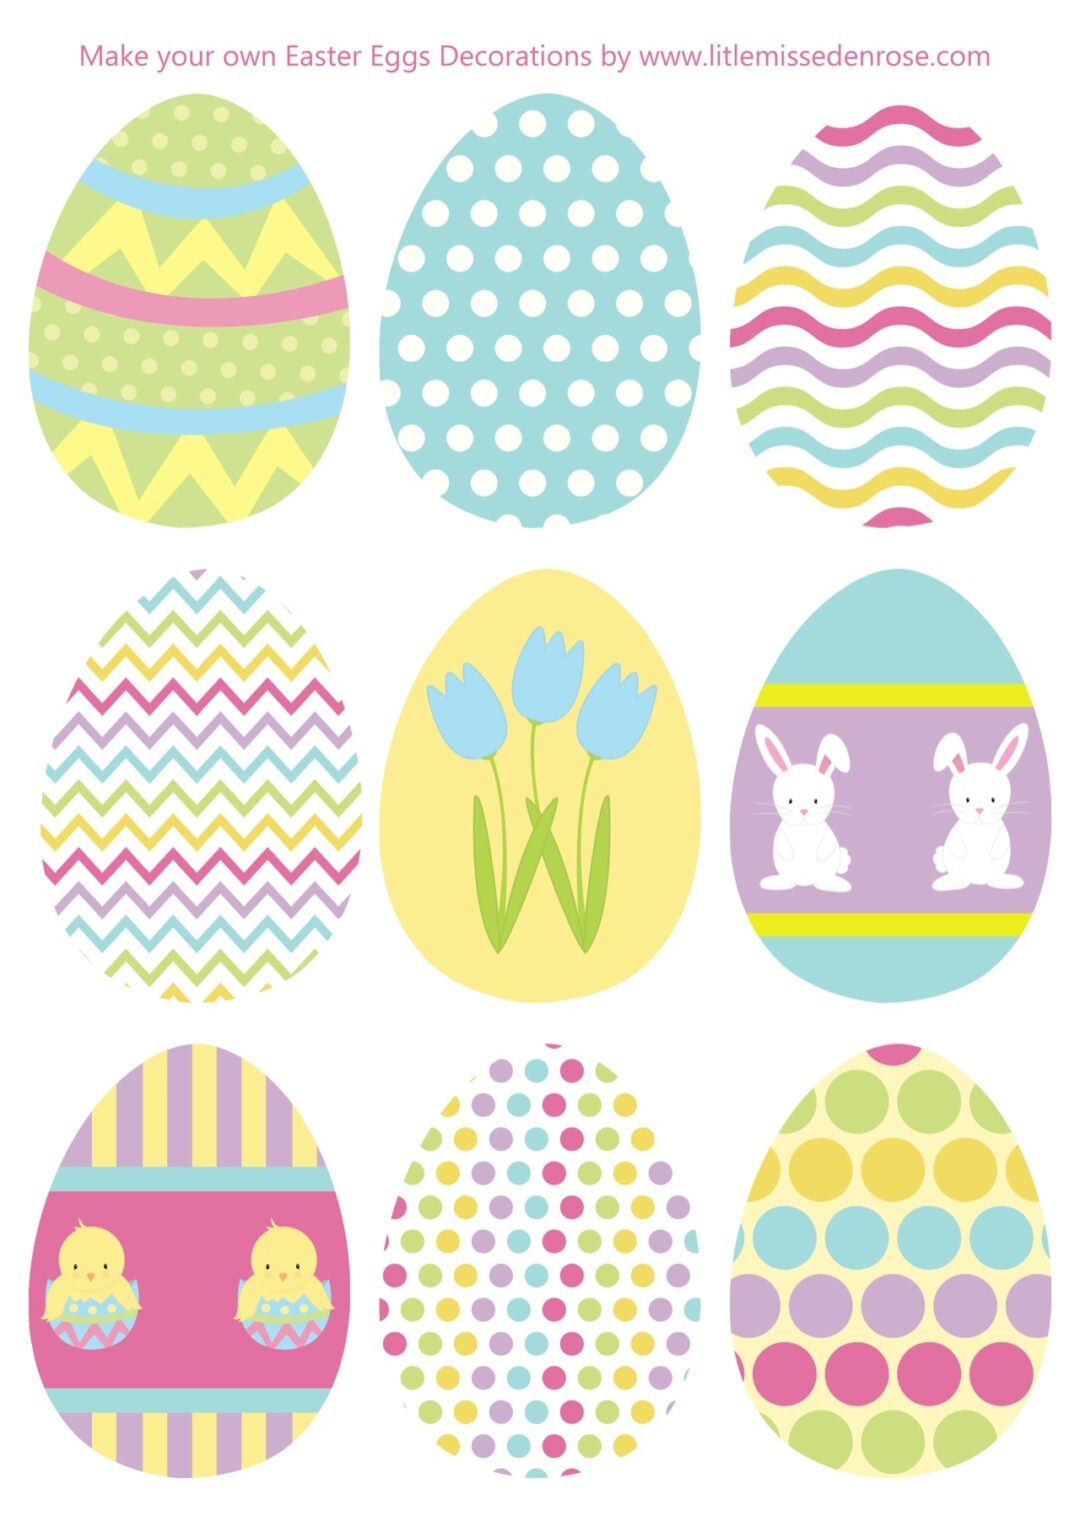 make-your-own-hanging-easter-egg-decorations-free-printable-little